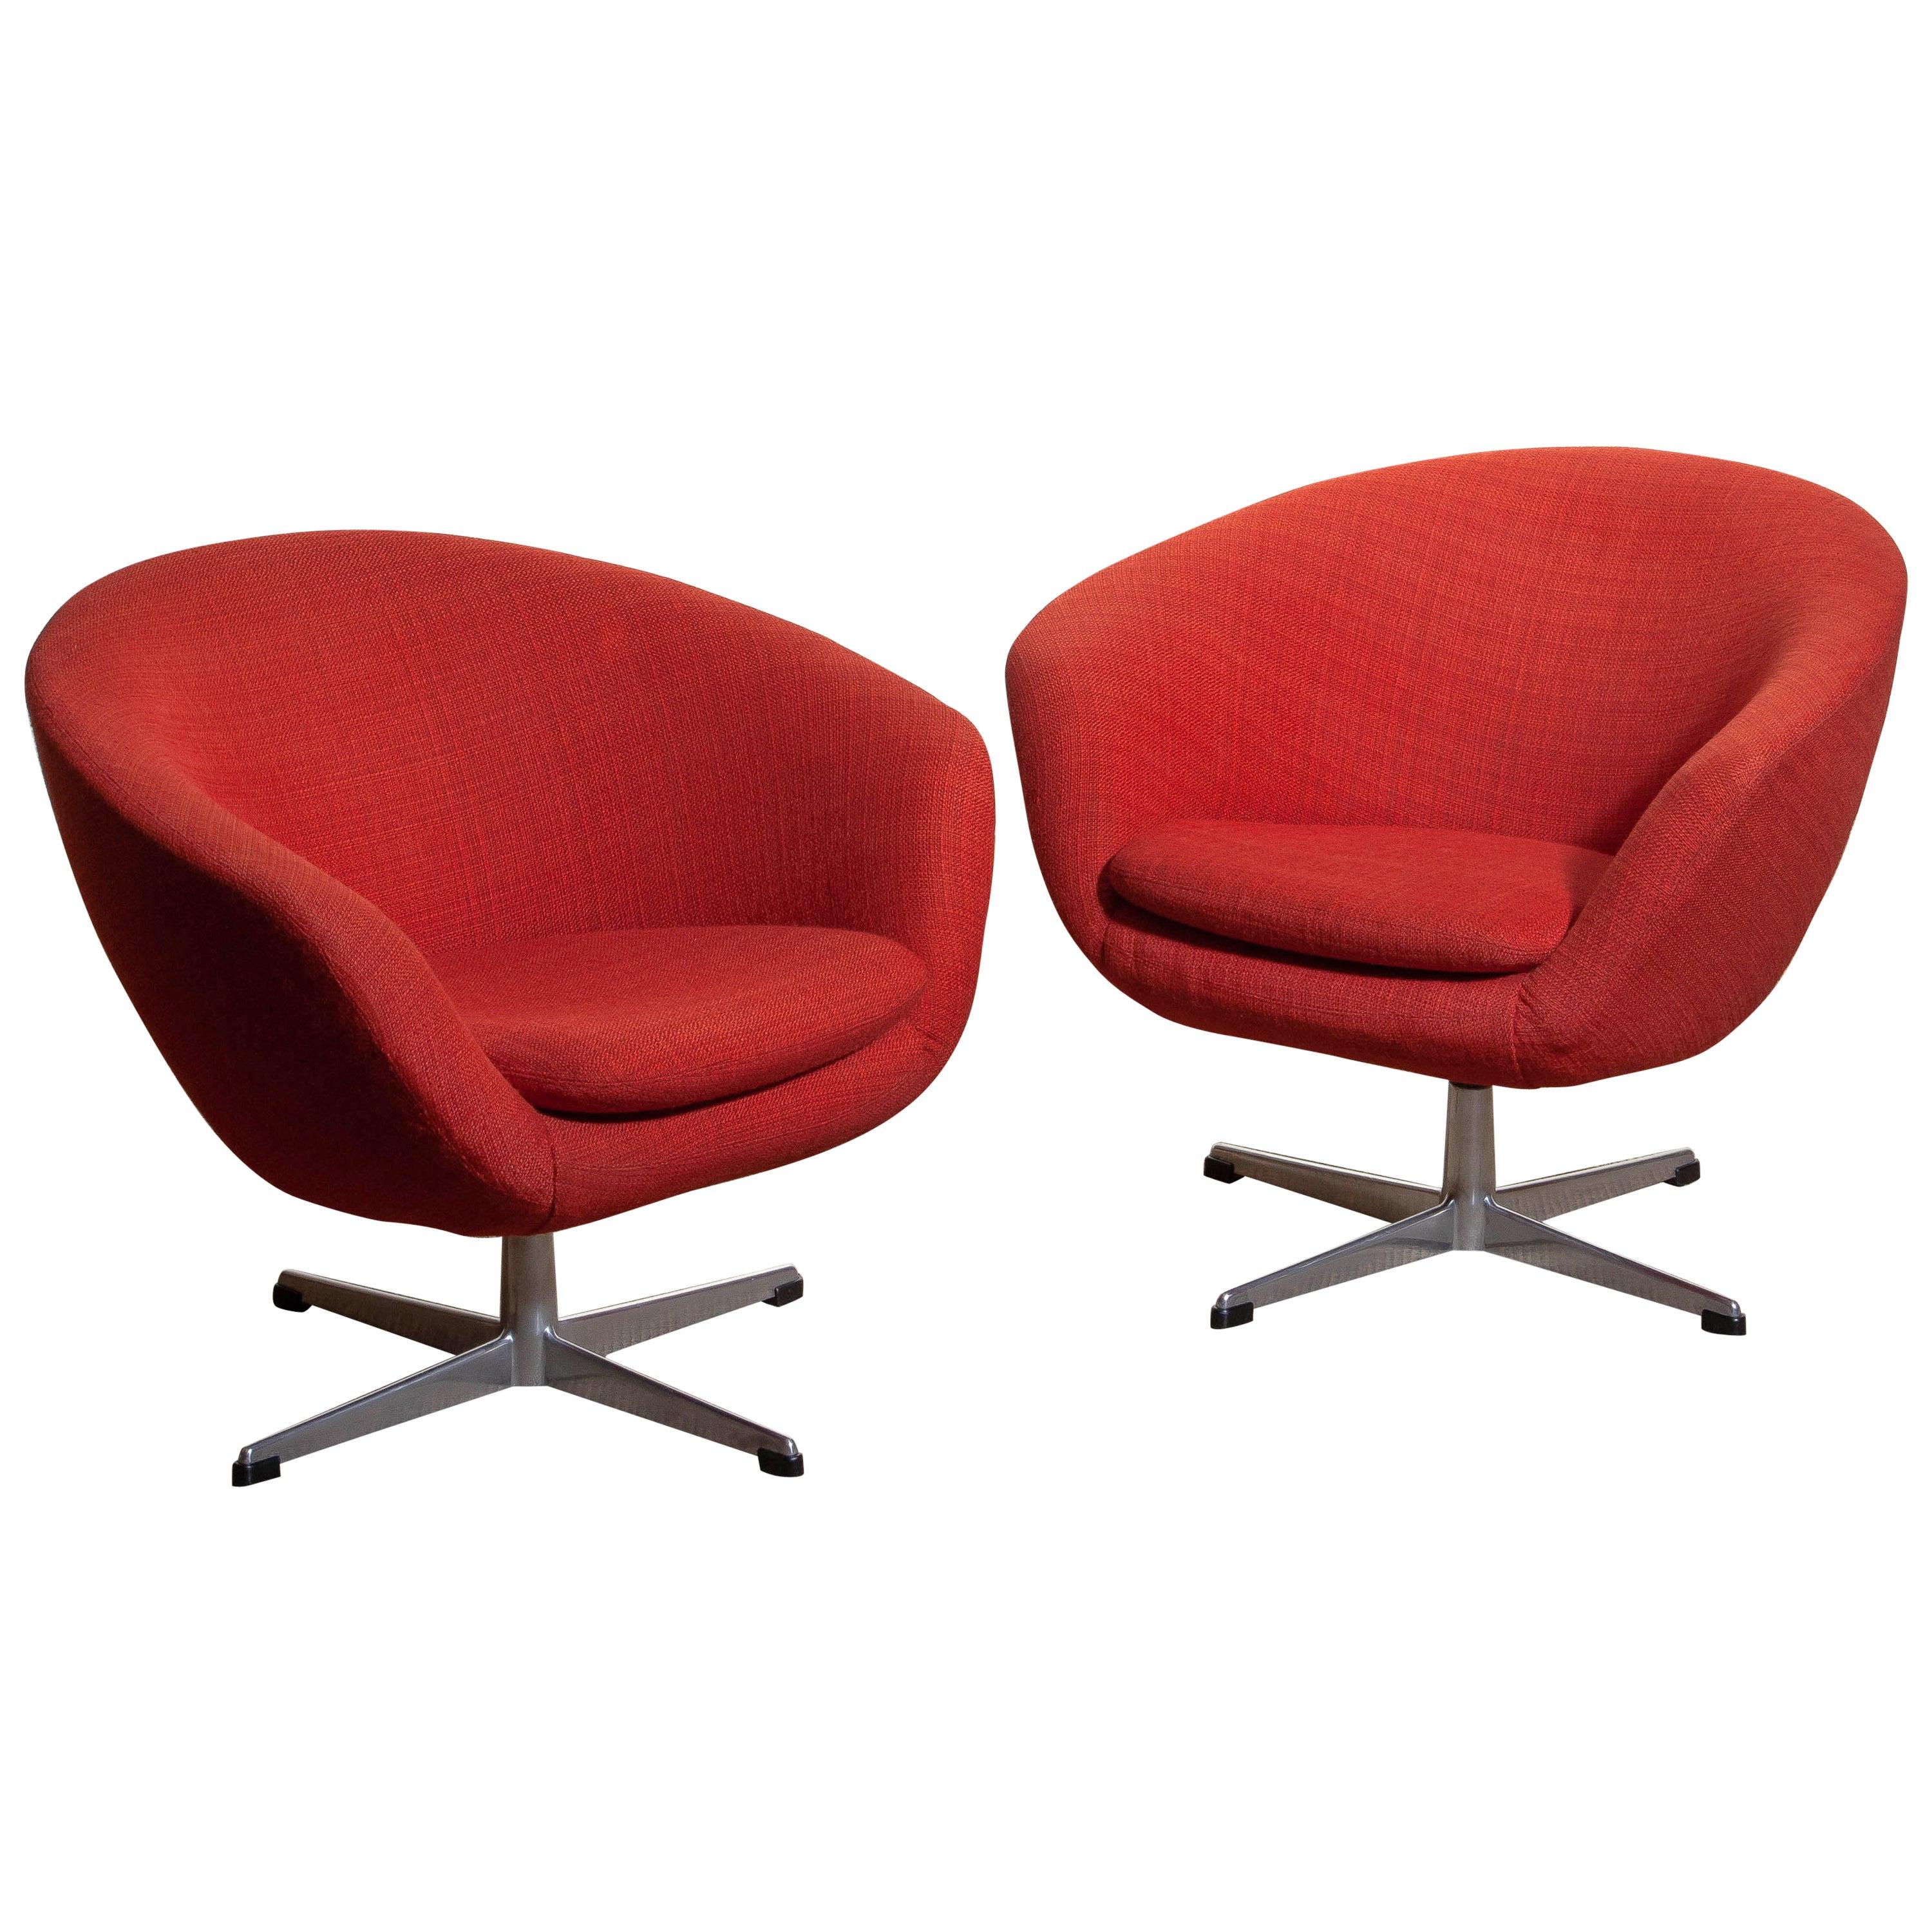 Mid-20th Century 1960s, Pair of Swivel Lounge Chairs by Carl Eric Klote for Overman, Denmark